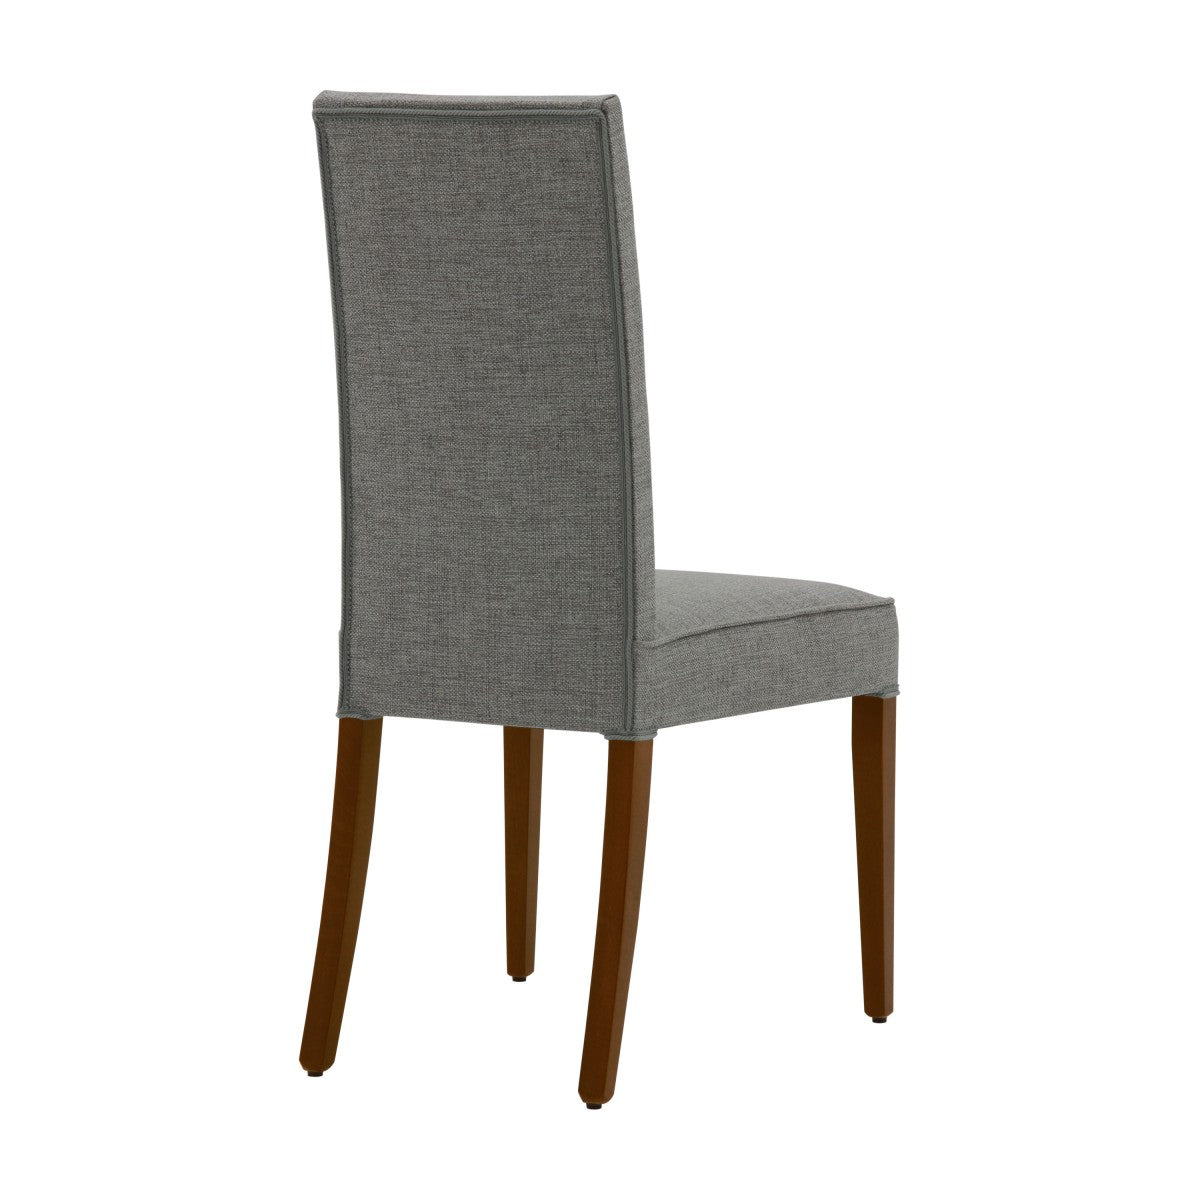 Joy Bespoke Upholstered Modern Contemporary Dining Chair MS278S Custom Made To Order